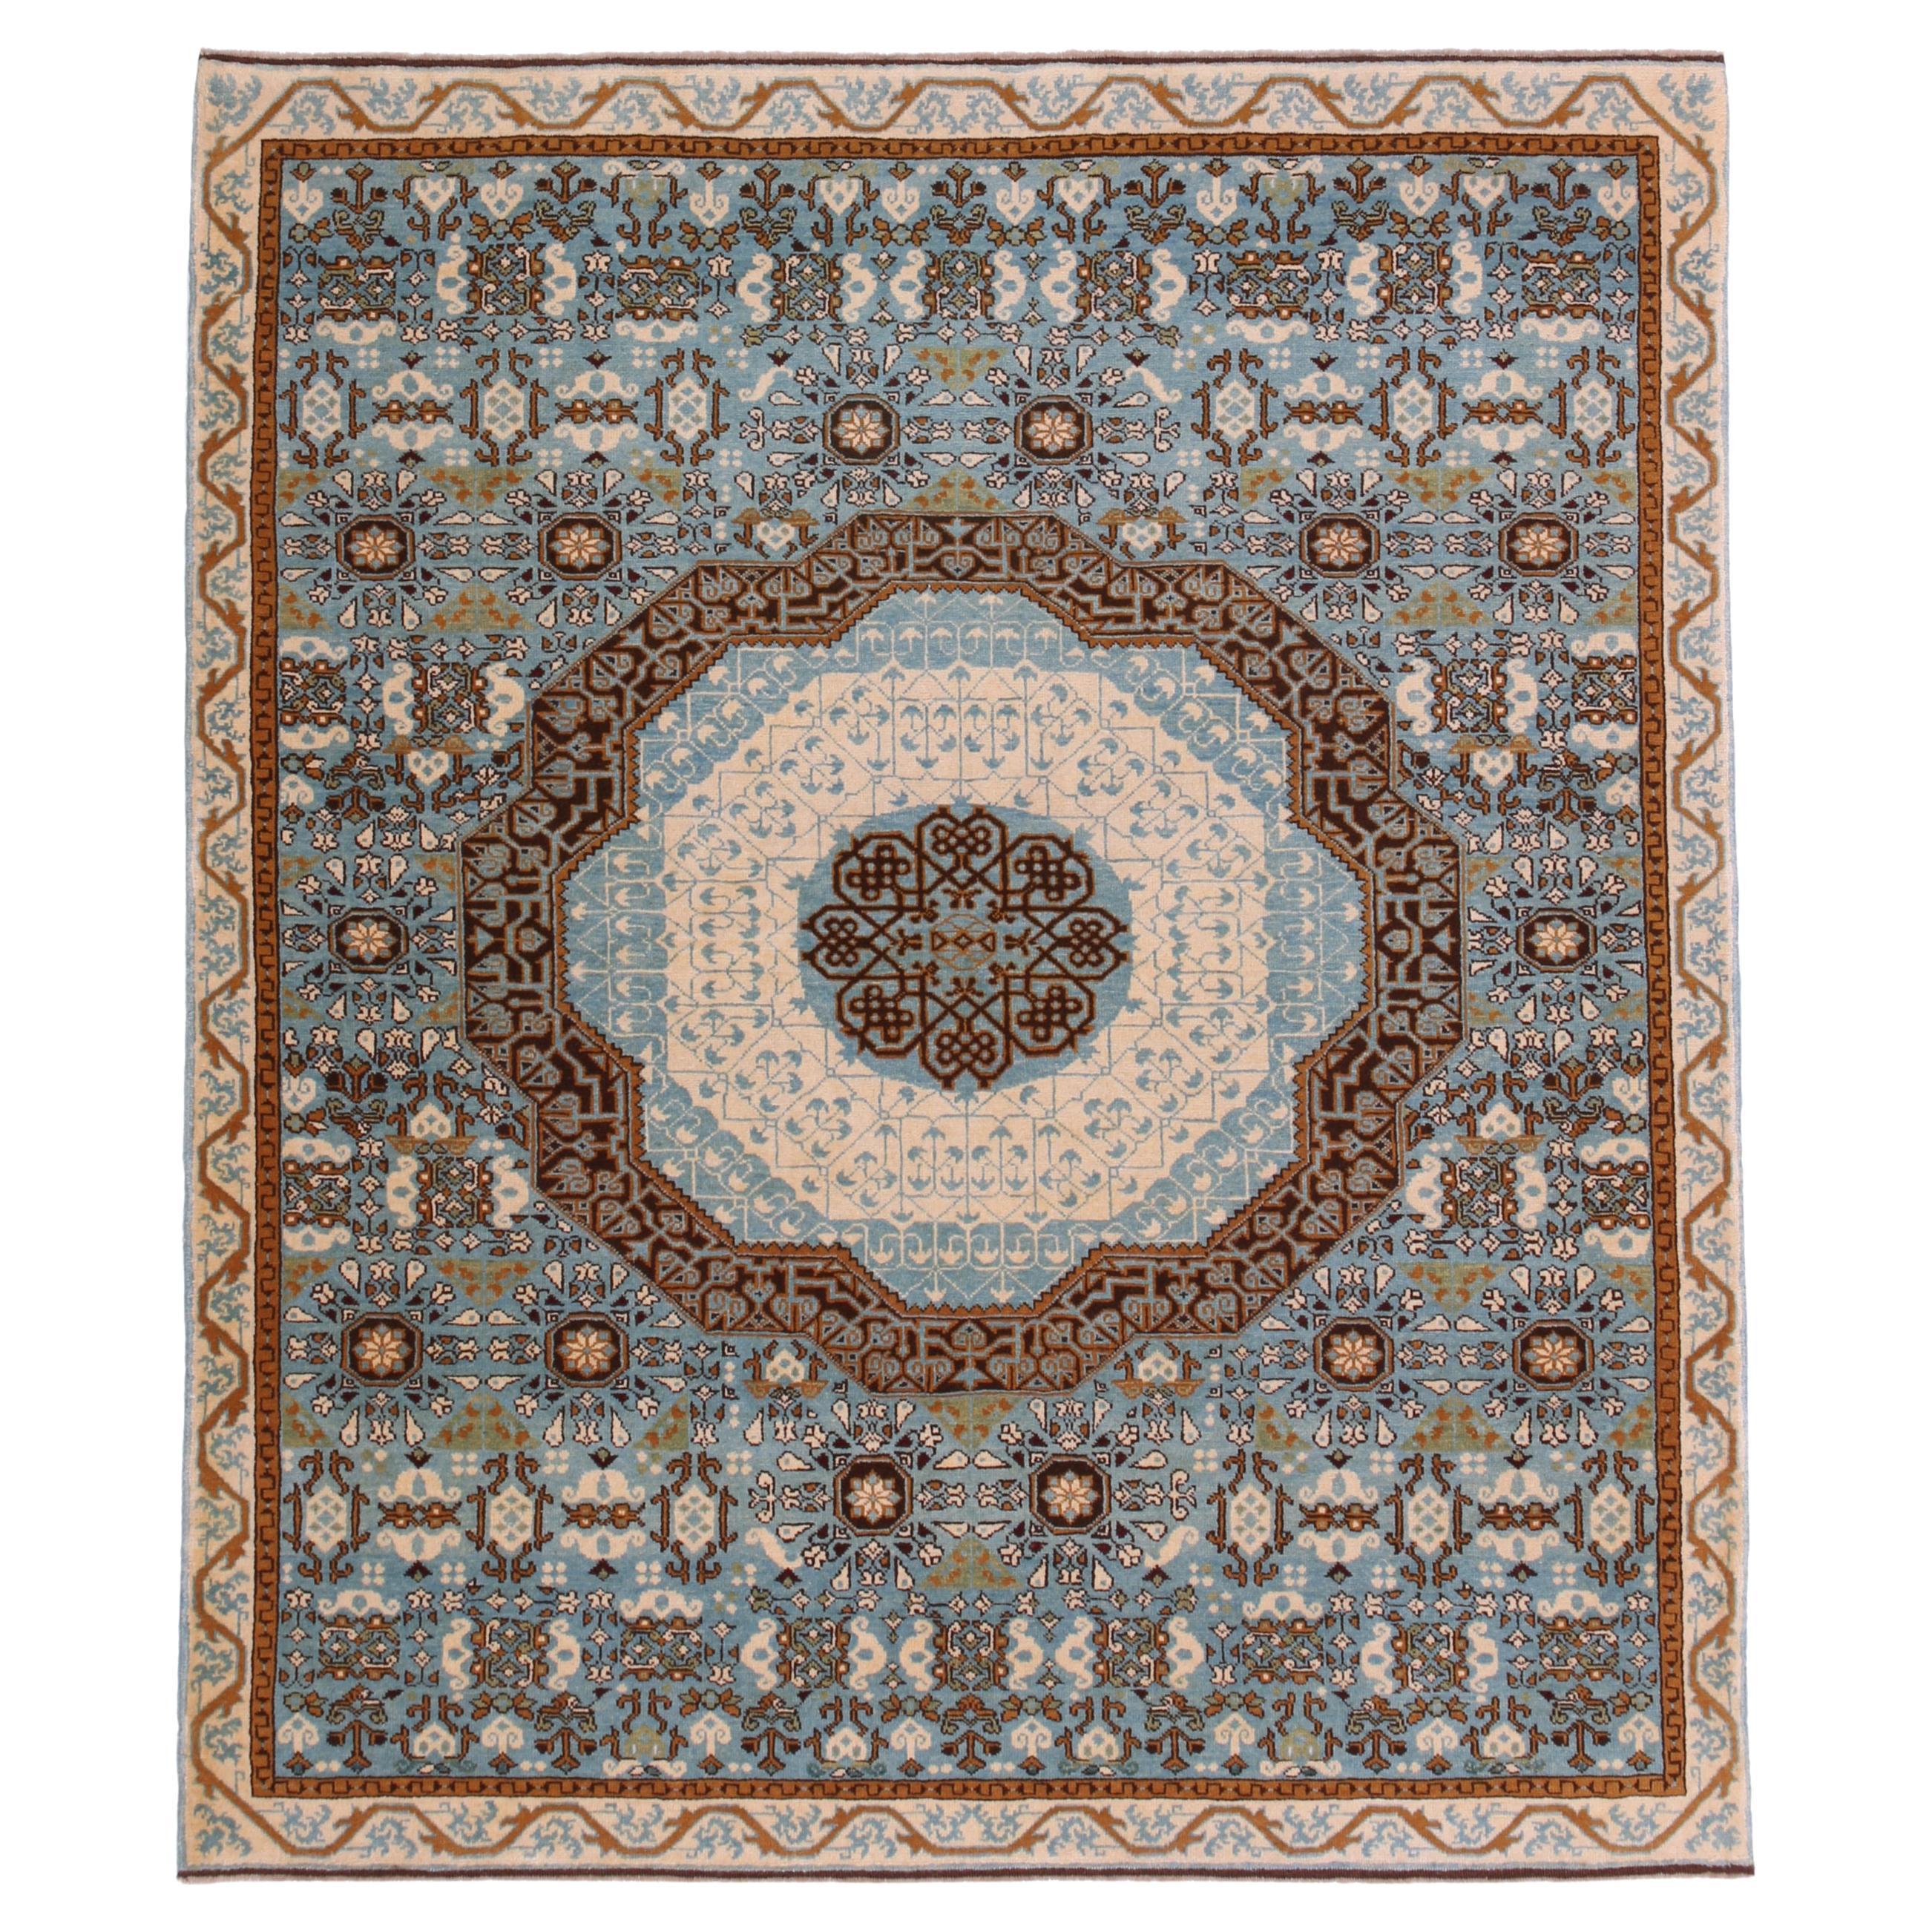 Ararat Rugs Mamluk Rug with Cusped Medallion Antique Revival Carpet Natural Dyed For Sale